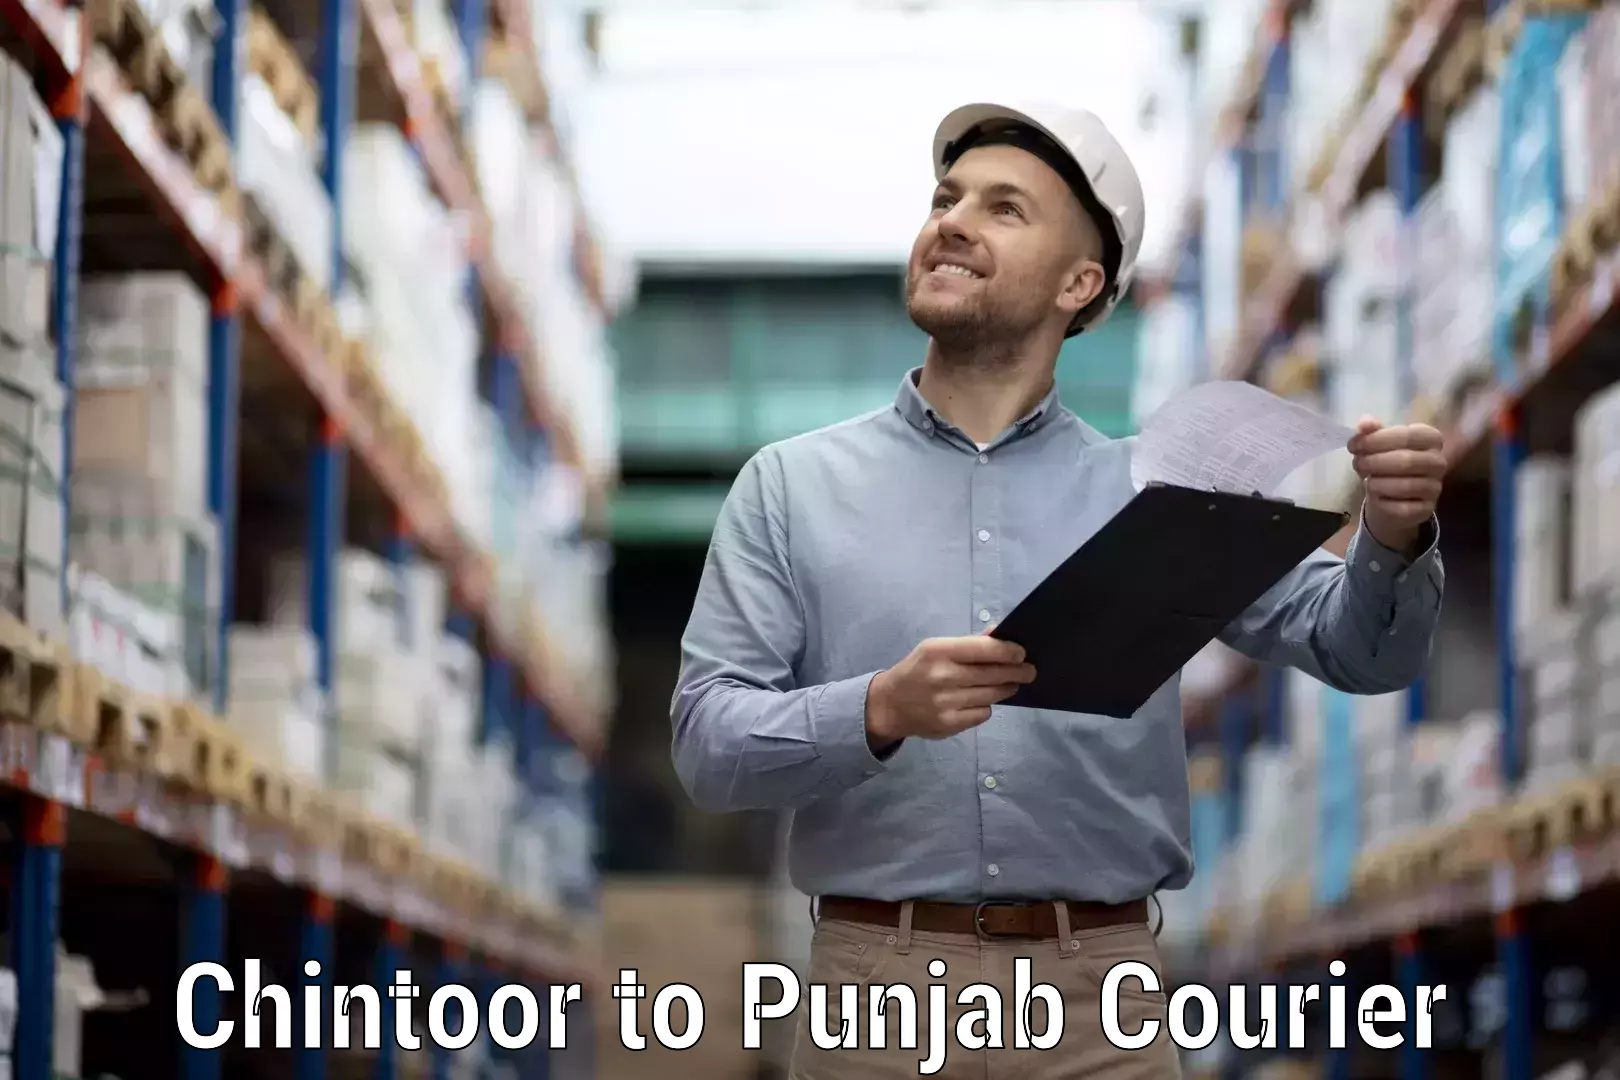 Smart shipping technology Chintoor to Patiala